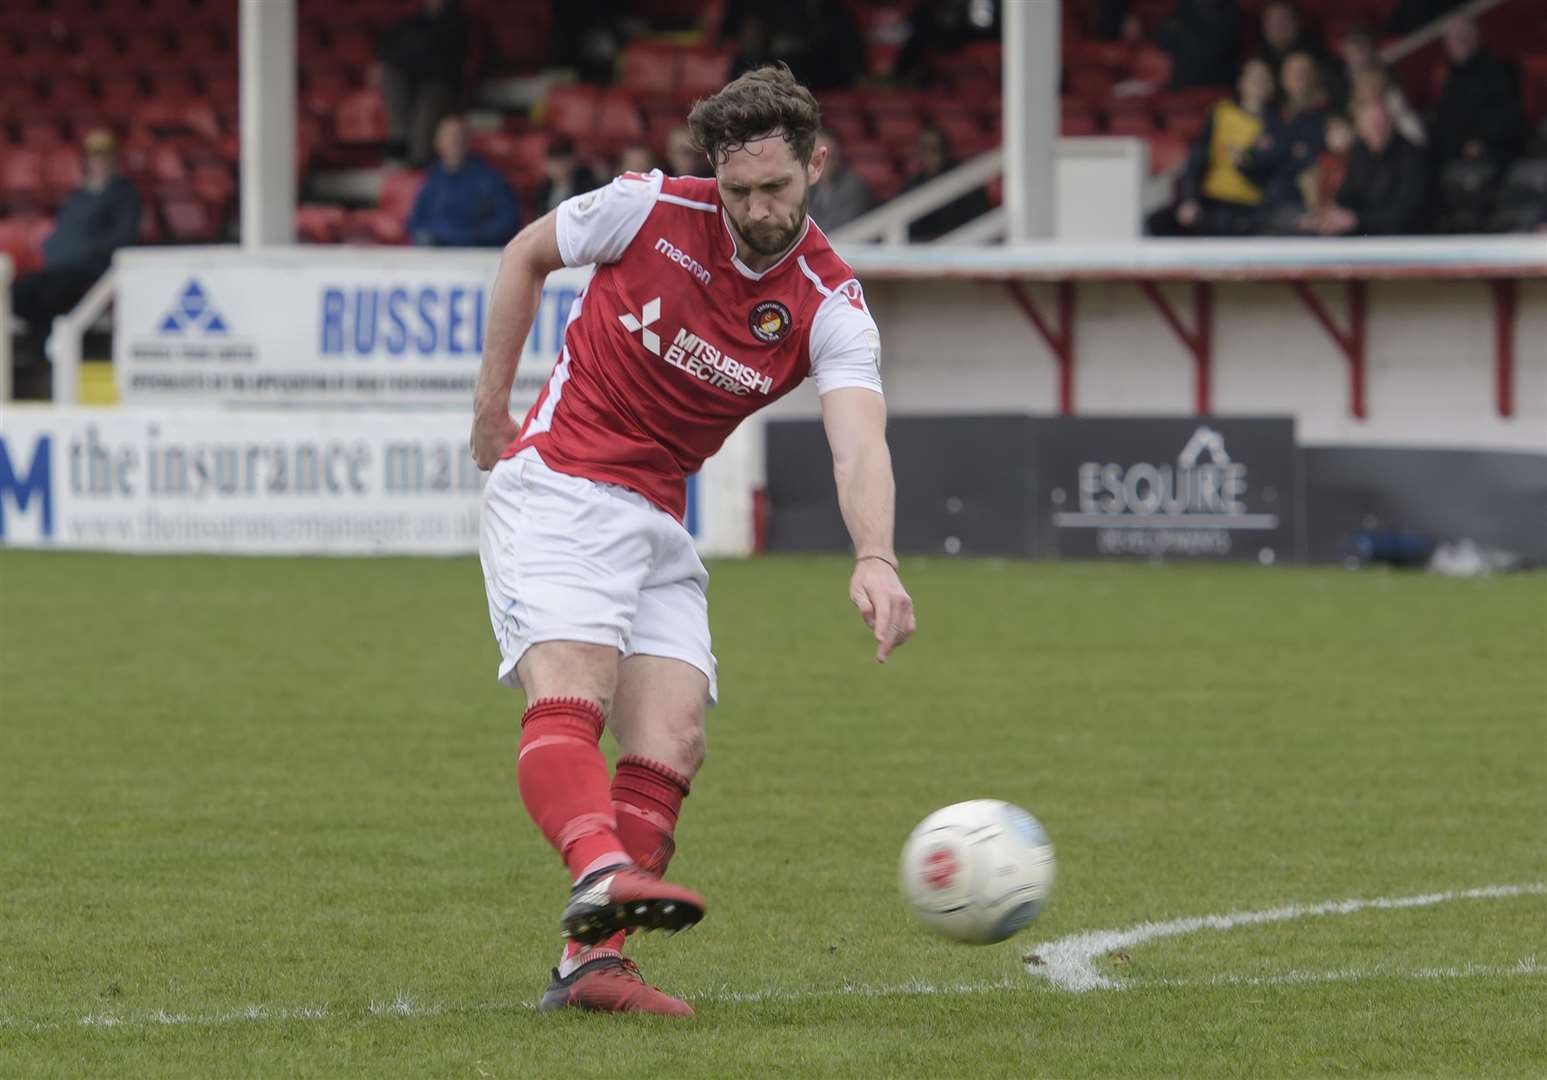 Dean Rance rifles in Ebbsfleet's dramatic equaliser Picture: Andy Payton